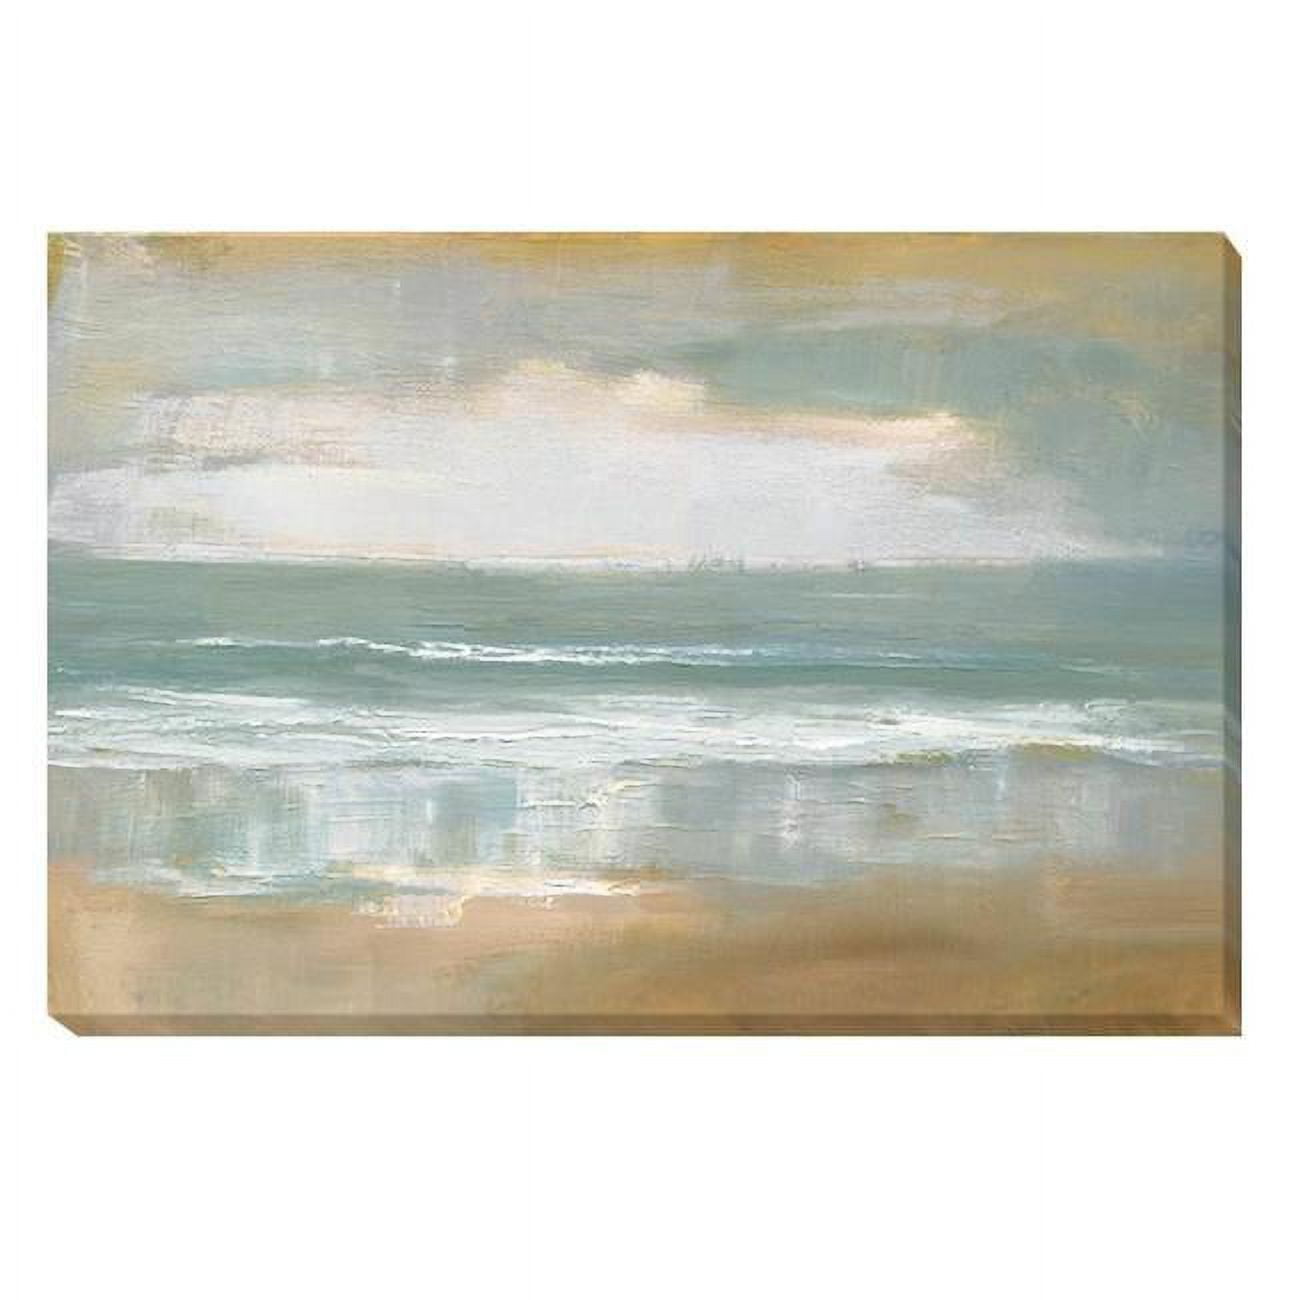 1218o778cg Shoreline By Caroline Gold Custom Gallery-wrapped Canvas Giclee Art - Ready To Hang, 12 X 18 X 1.5 In.